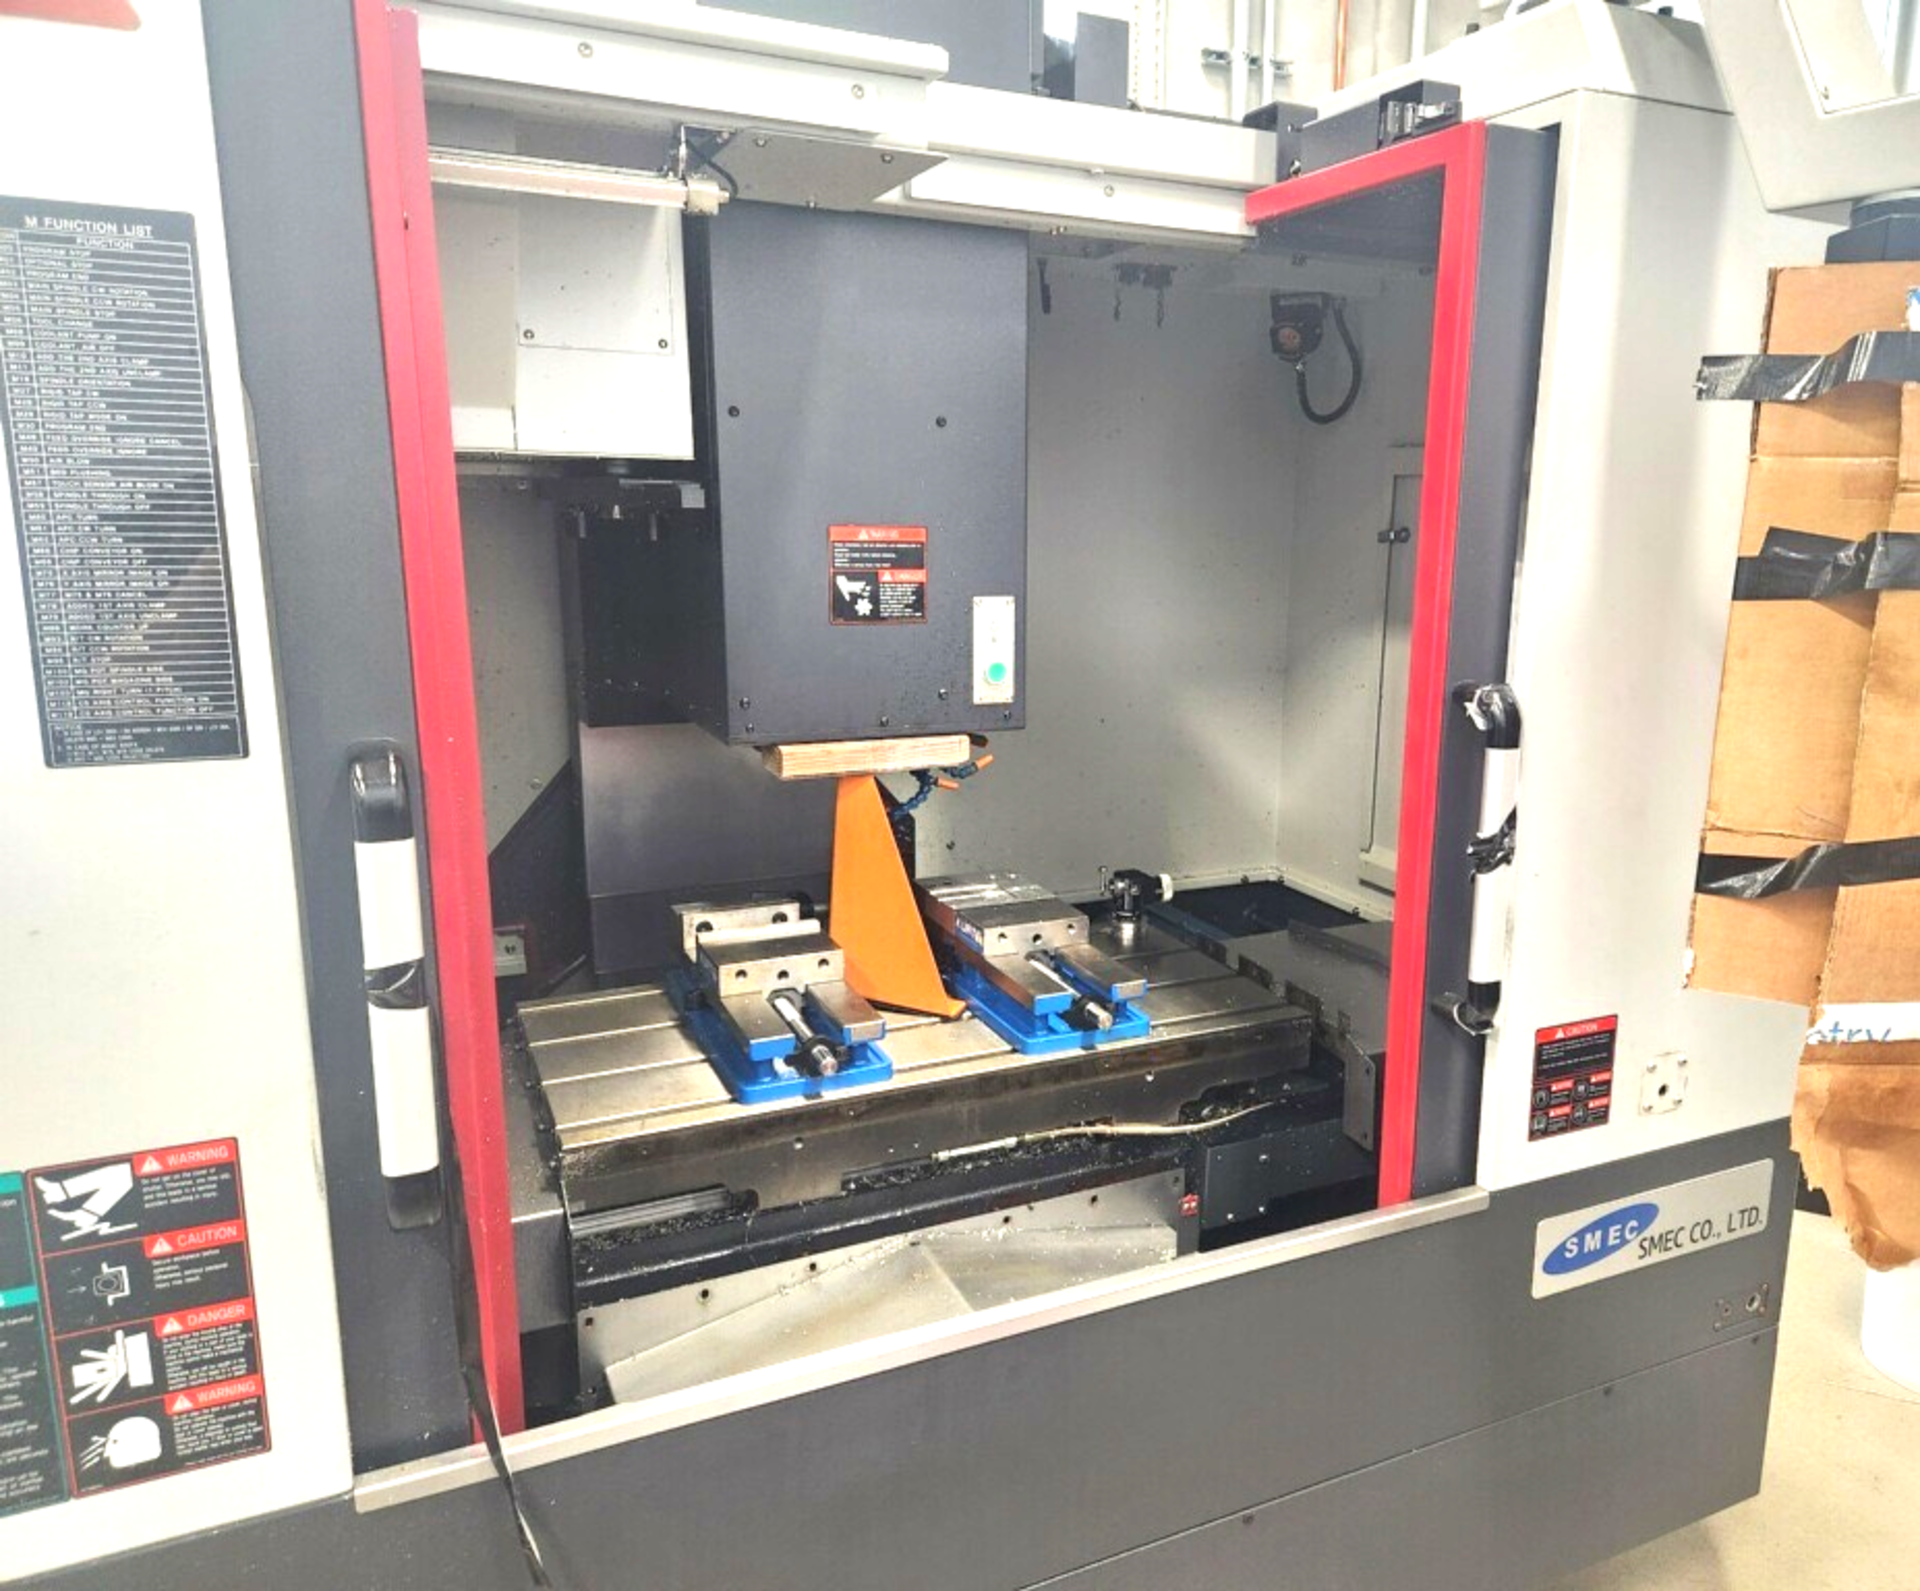 SMEC (SAMSUNG) MCV-4300 3-AXIS CNC VERTICAL MACHINING CENTER, S/N 18J200123, NEW 2018 - Image 3 of 7